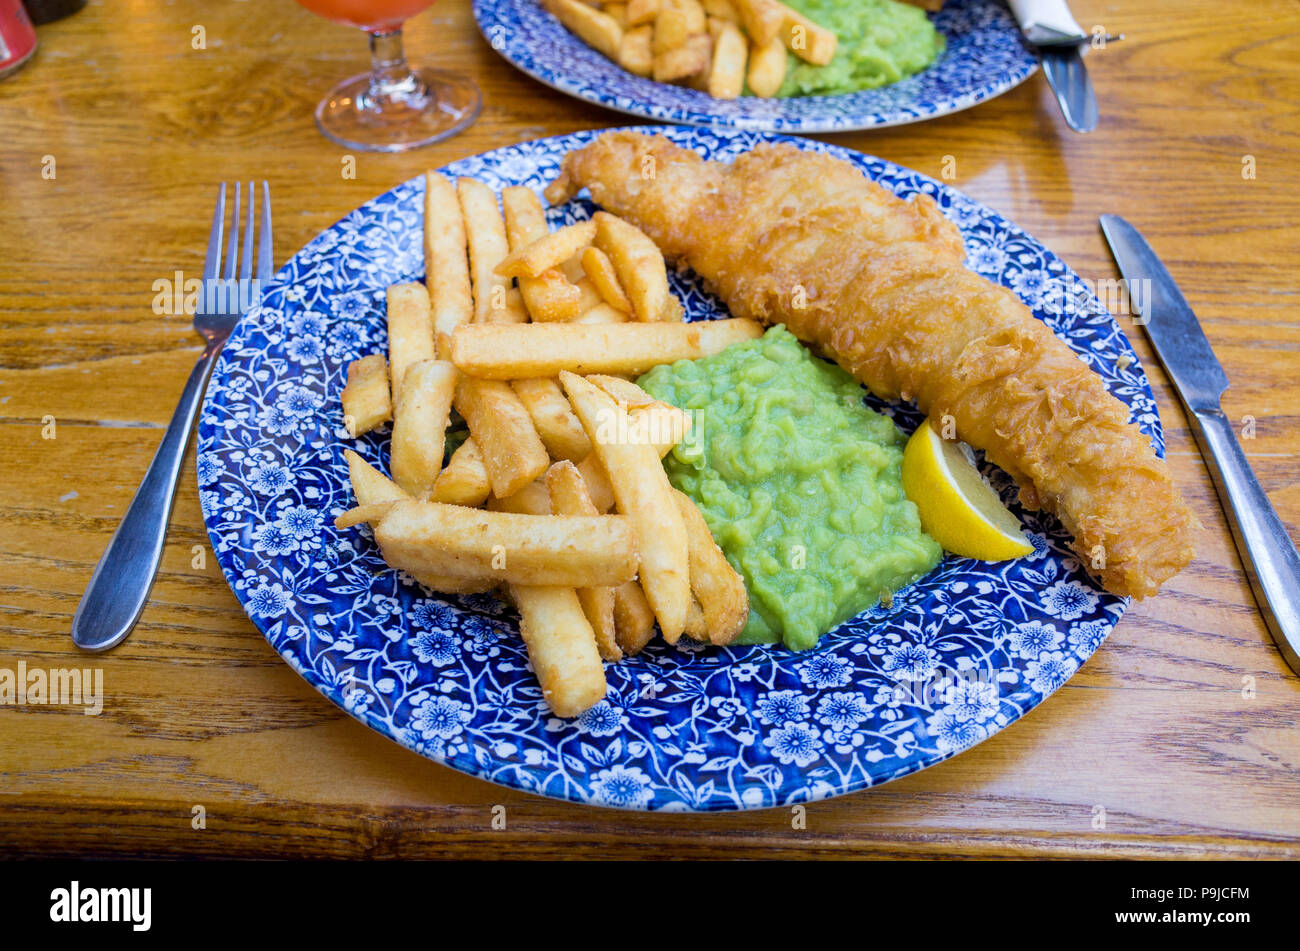 Fish and chips pub lunch at JD Wetherspoon, UK Stock Photo